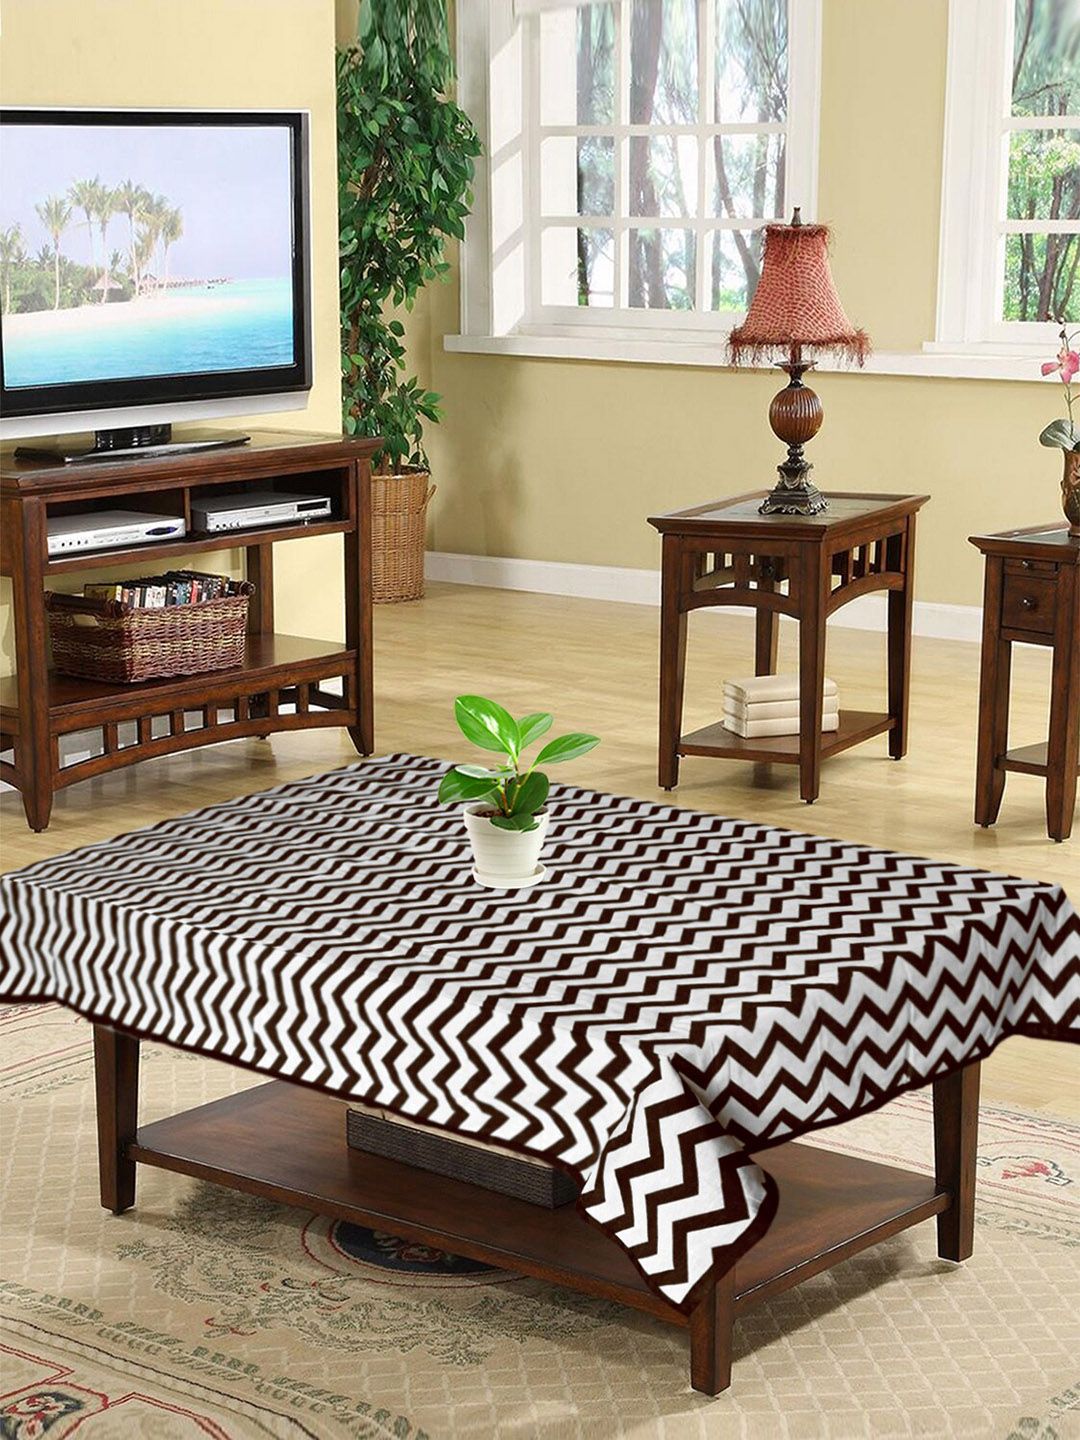 Kuber Industries Brown & White Printed 4 Seater Cotton Table Cover Price in India